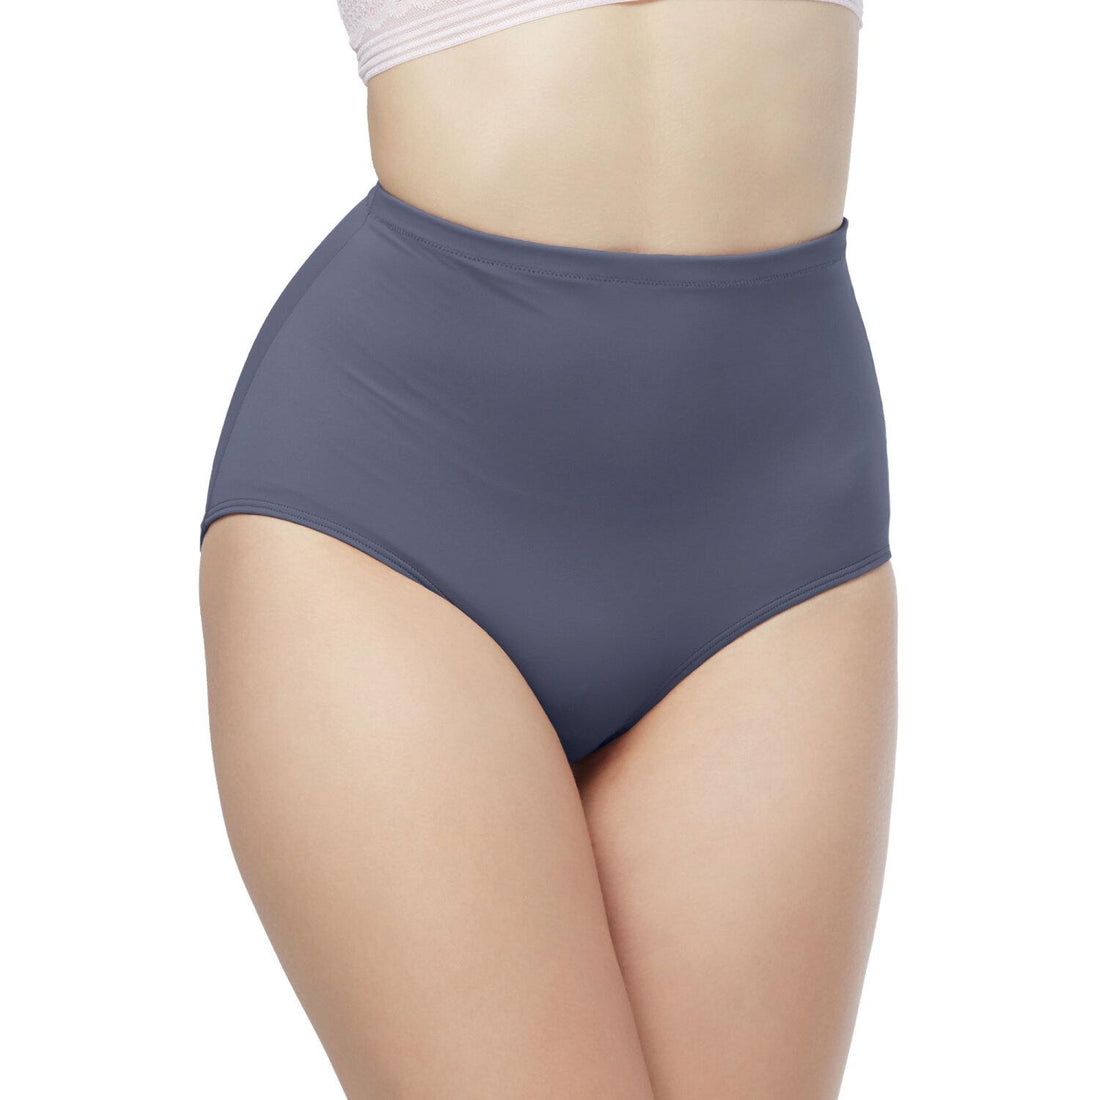 e-Tax  10.0% OFF on WACOAL Multicolor Secret Support H-Fit Panty